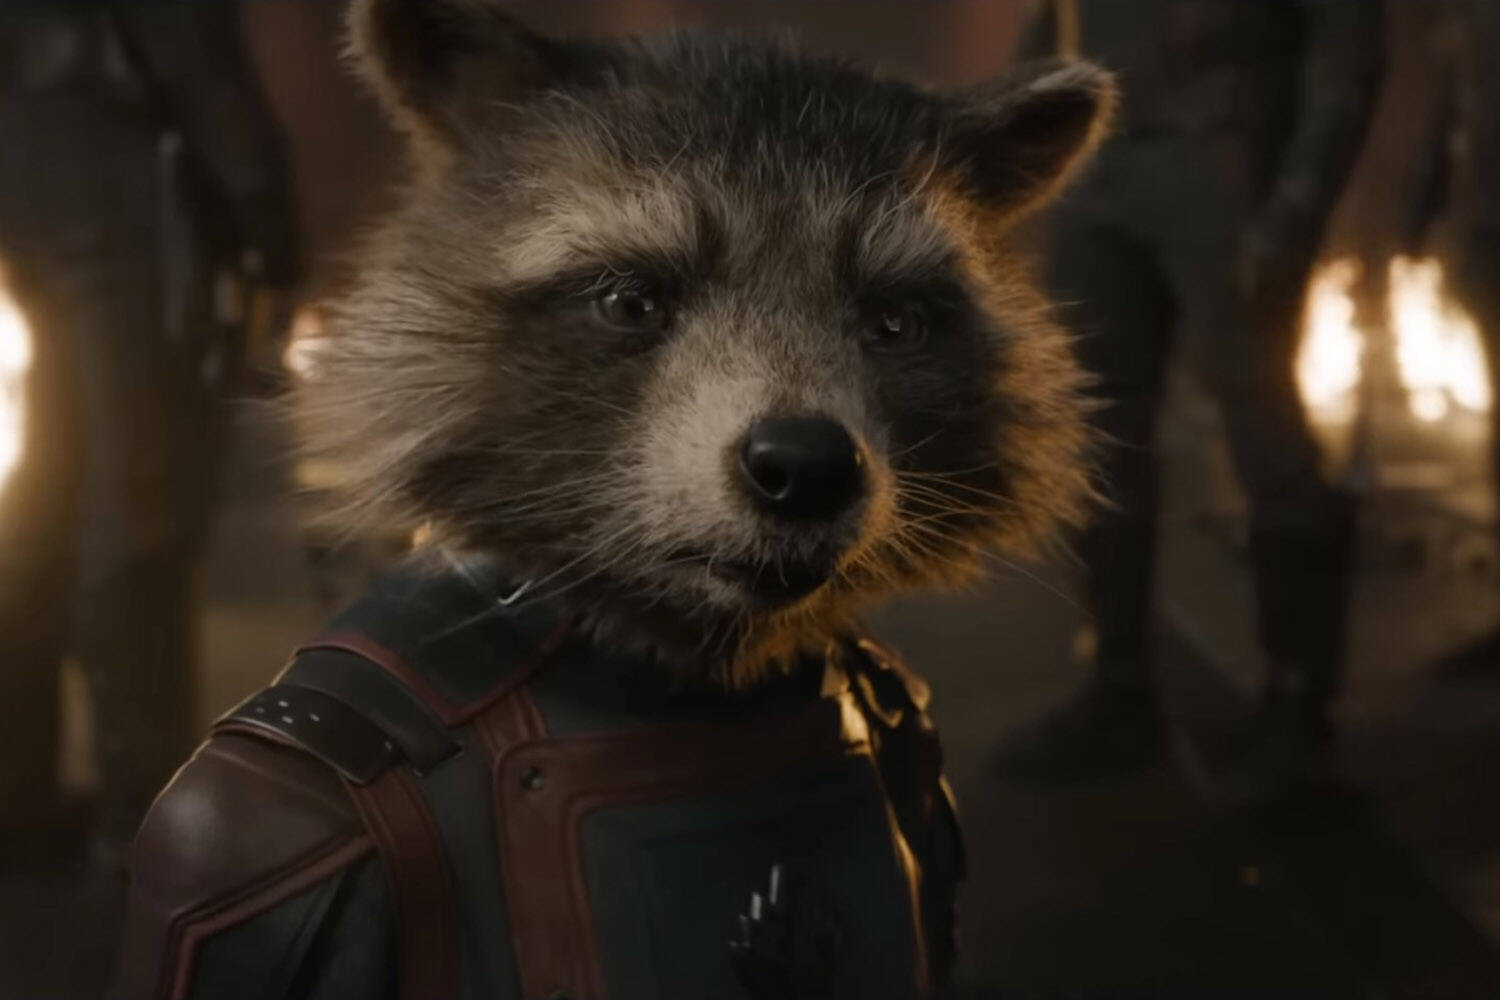 Promotional image courtesy Marvel Studios
Rocket, an entirely computer generated character is performed onset by Sean Gunn and voiced by Bradley Cooper in “Guardians of the Galaxy Vol. 3.” Despite appearances, he’s the emotional center of the film.